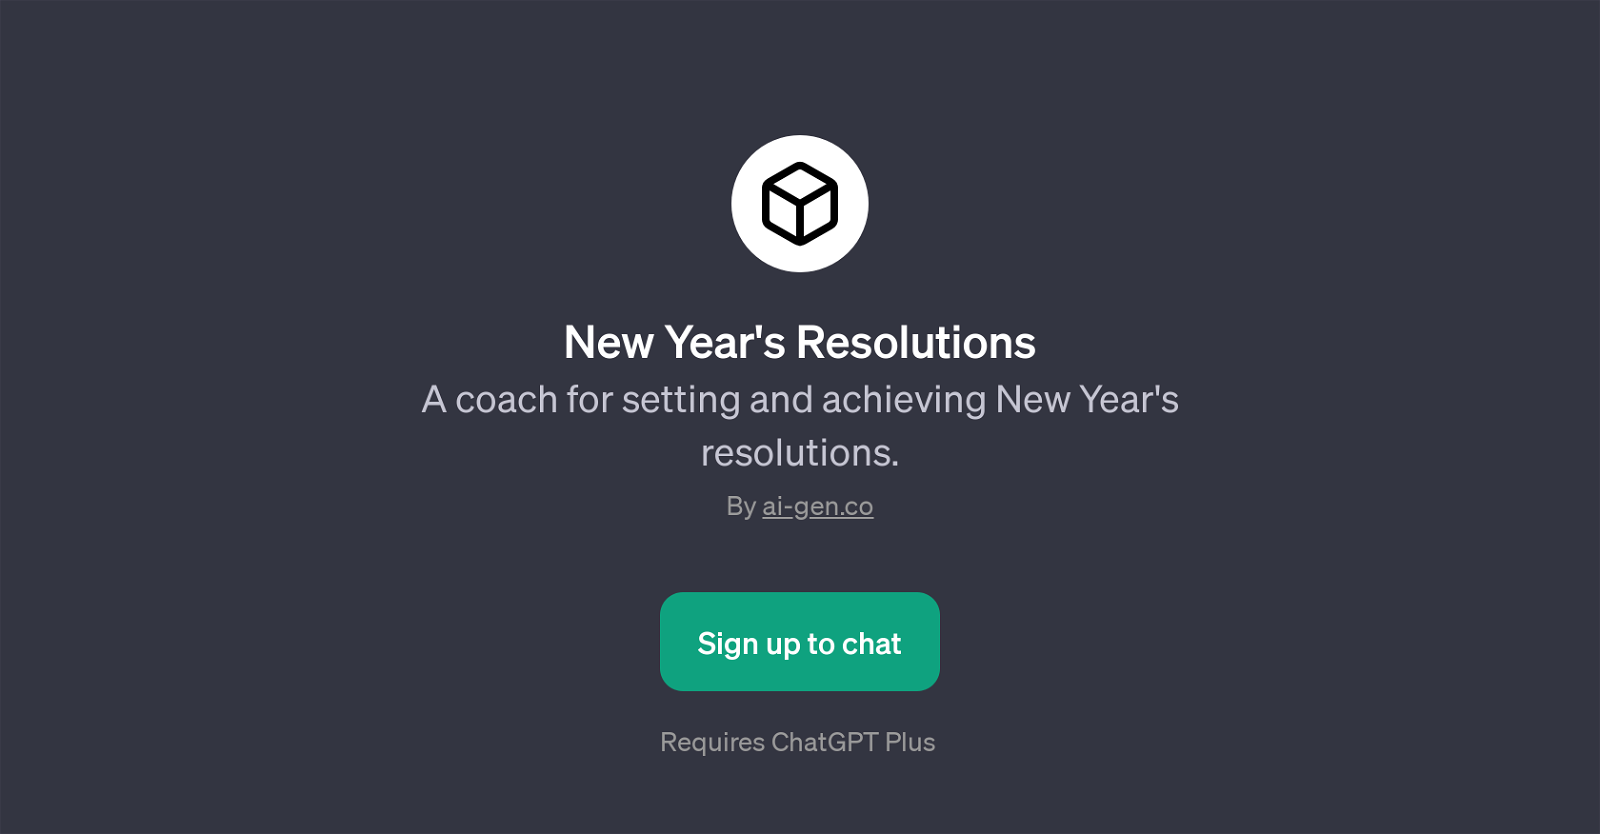 New Year's Resolutions website